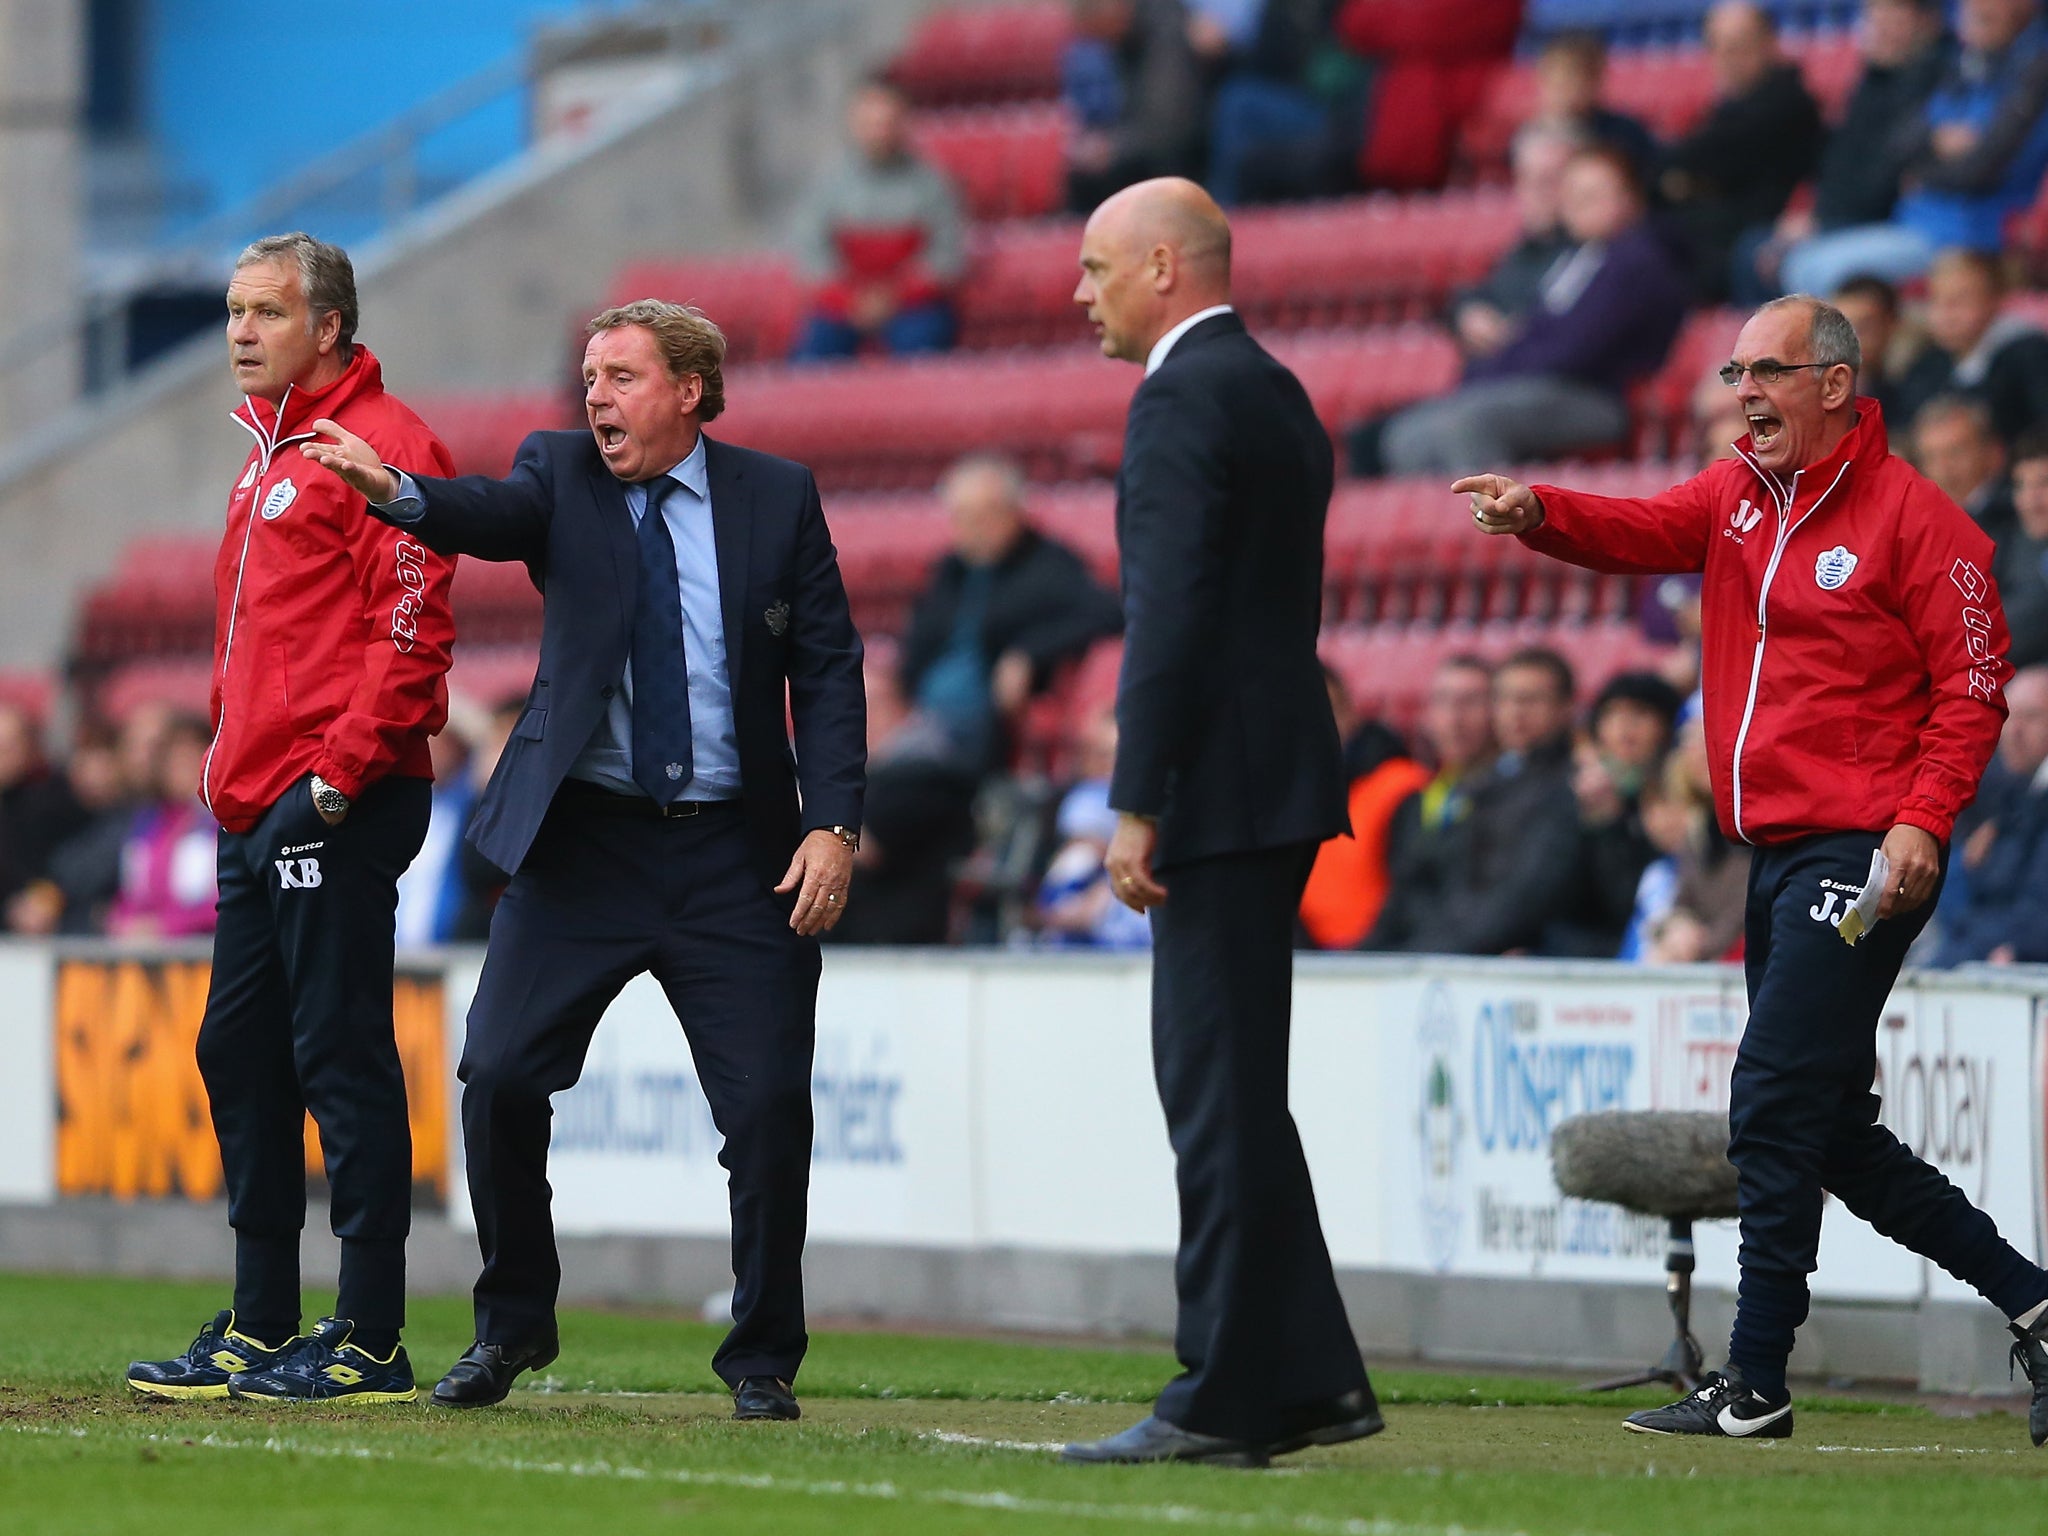 QPR manager Harry Redknapp remonstrates on the sideline during the 0-0 play-off draw with Wigan